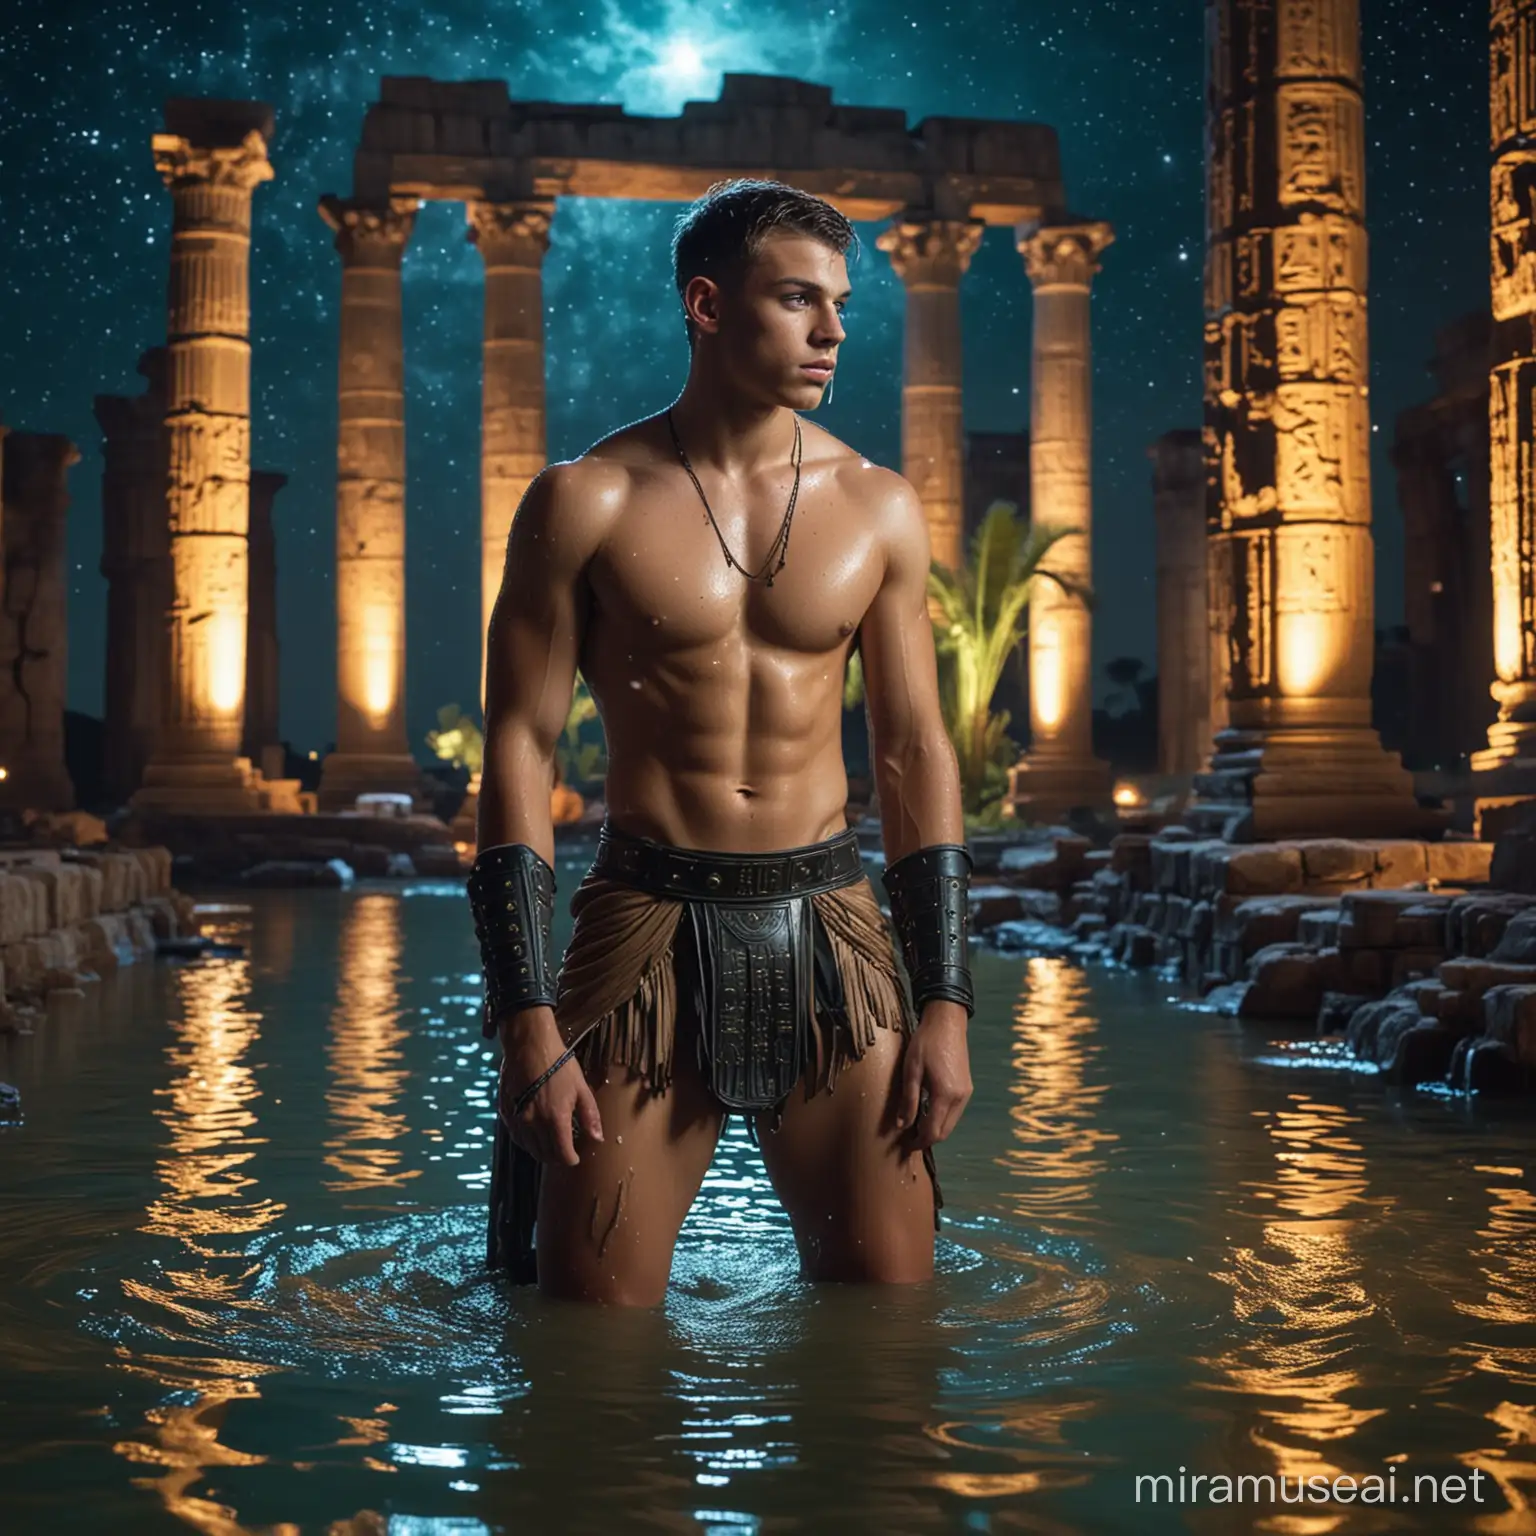 Sexy sweaty wet muscular young teen boy with shaved hairdress, crouching in the water of an oasis. Dressed as a roman soldier shirtless. In the ruins of a egyptian temple. At night. The sky is full of stars with a huge galaxy. Blue and green neon colors ambient.